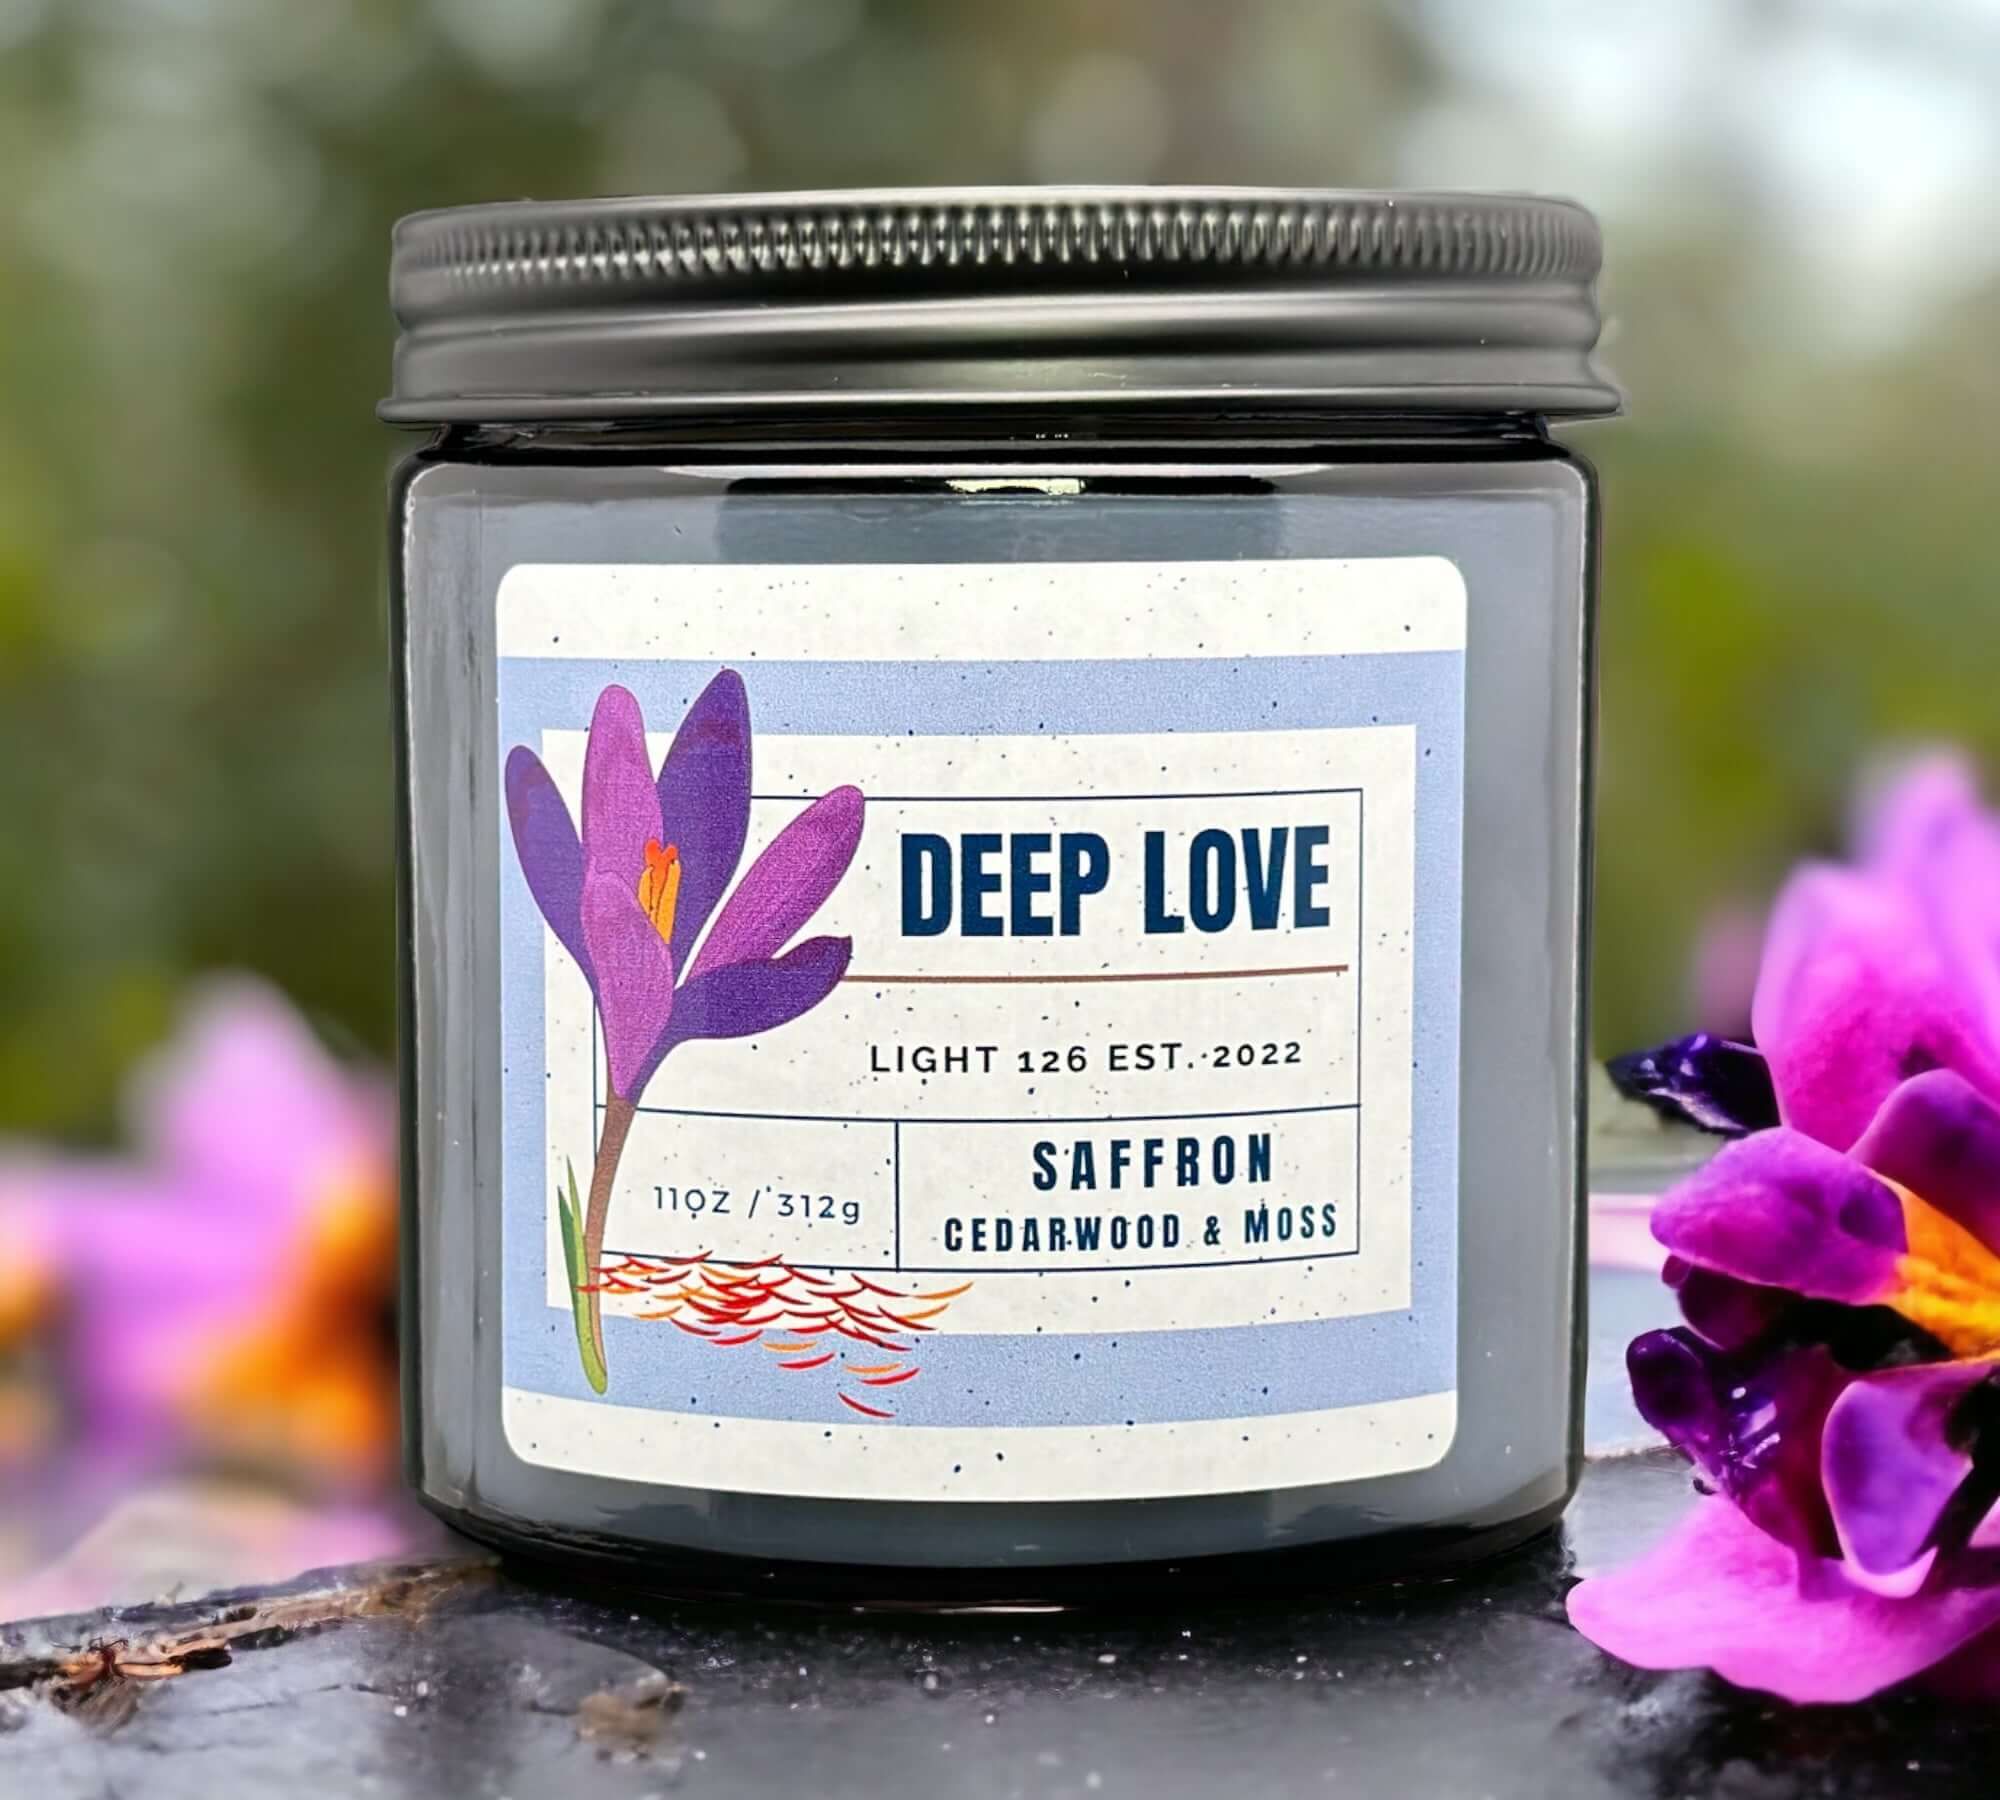 Deep Love scented candle. Saffron cedarwood and moss fragrance.